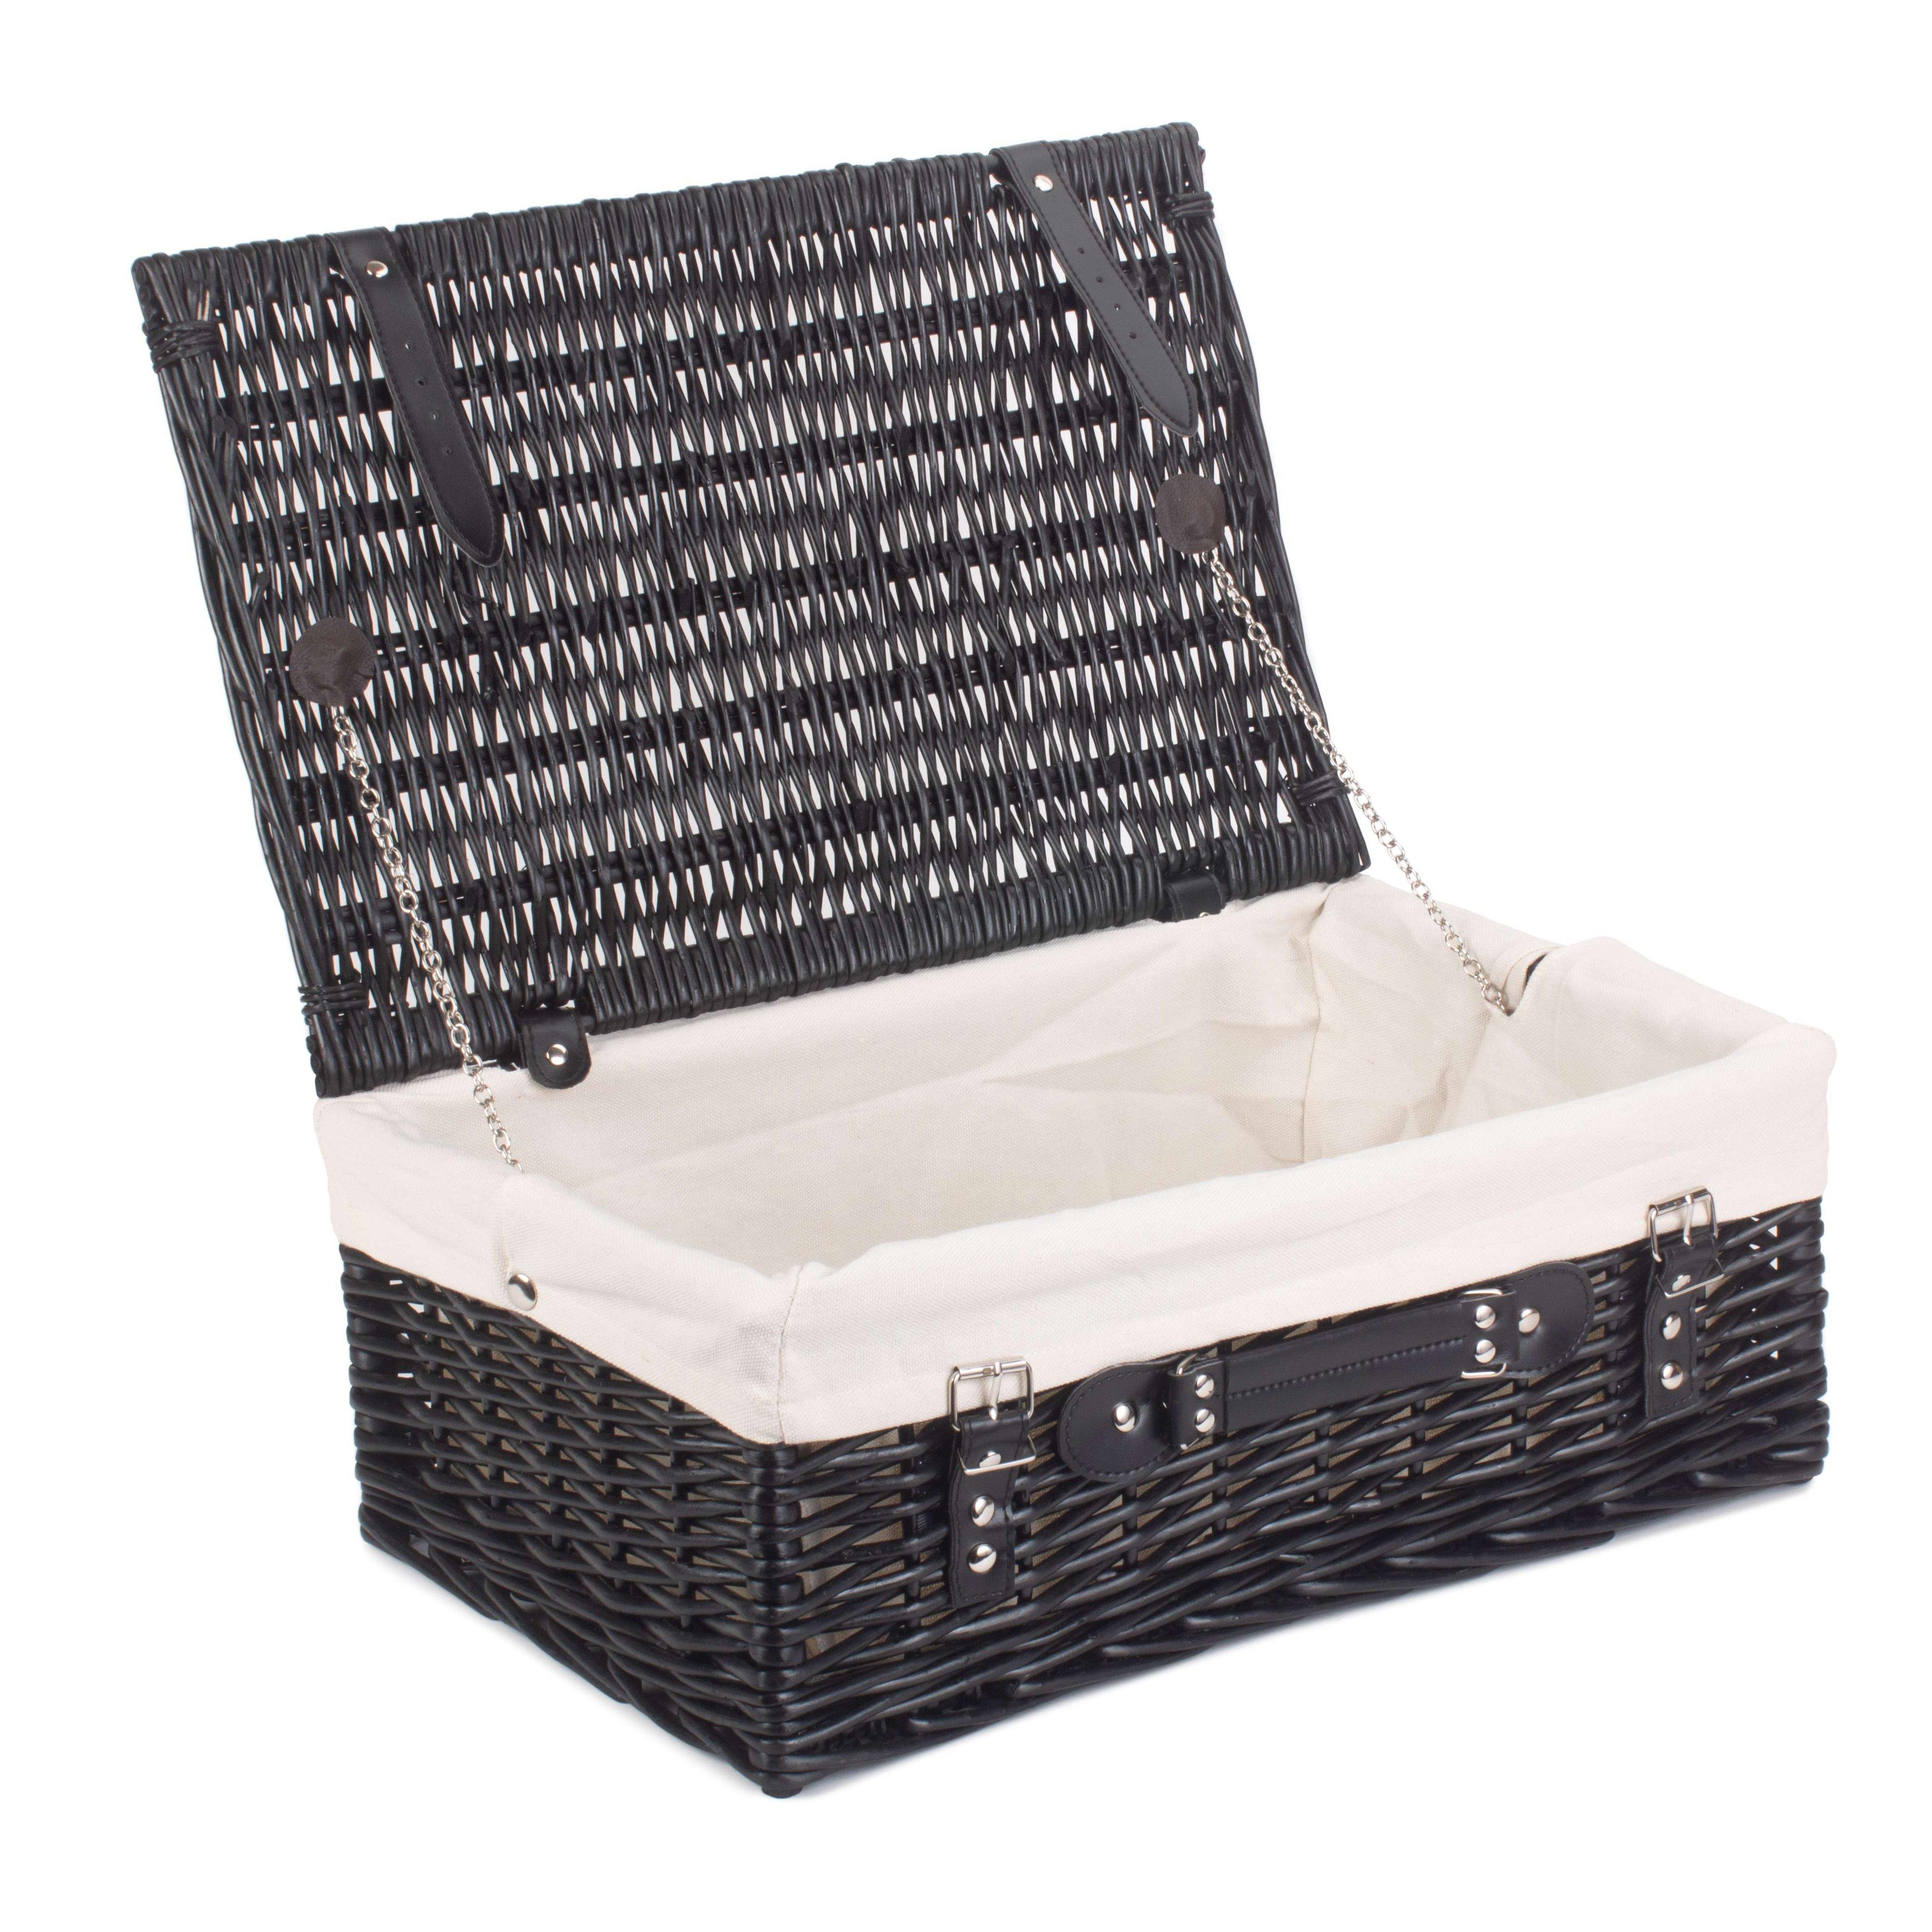 Wicker 45cm Empty Black Willow Picnic Basket with Cotton Lining